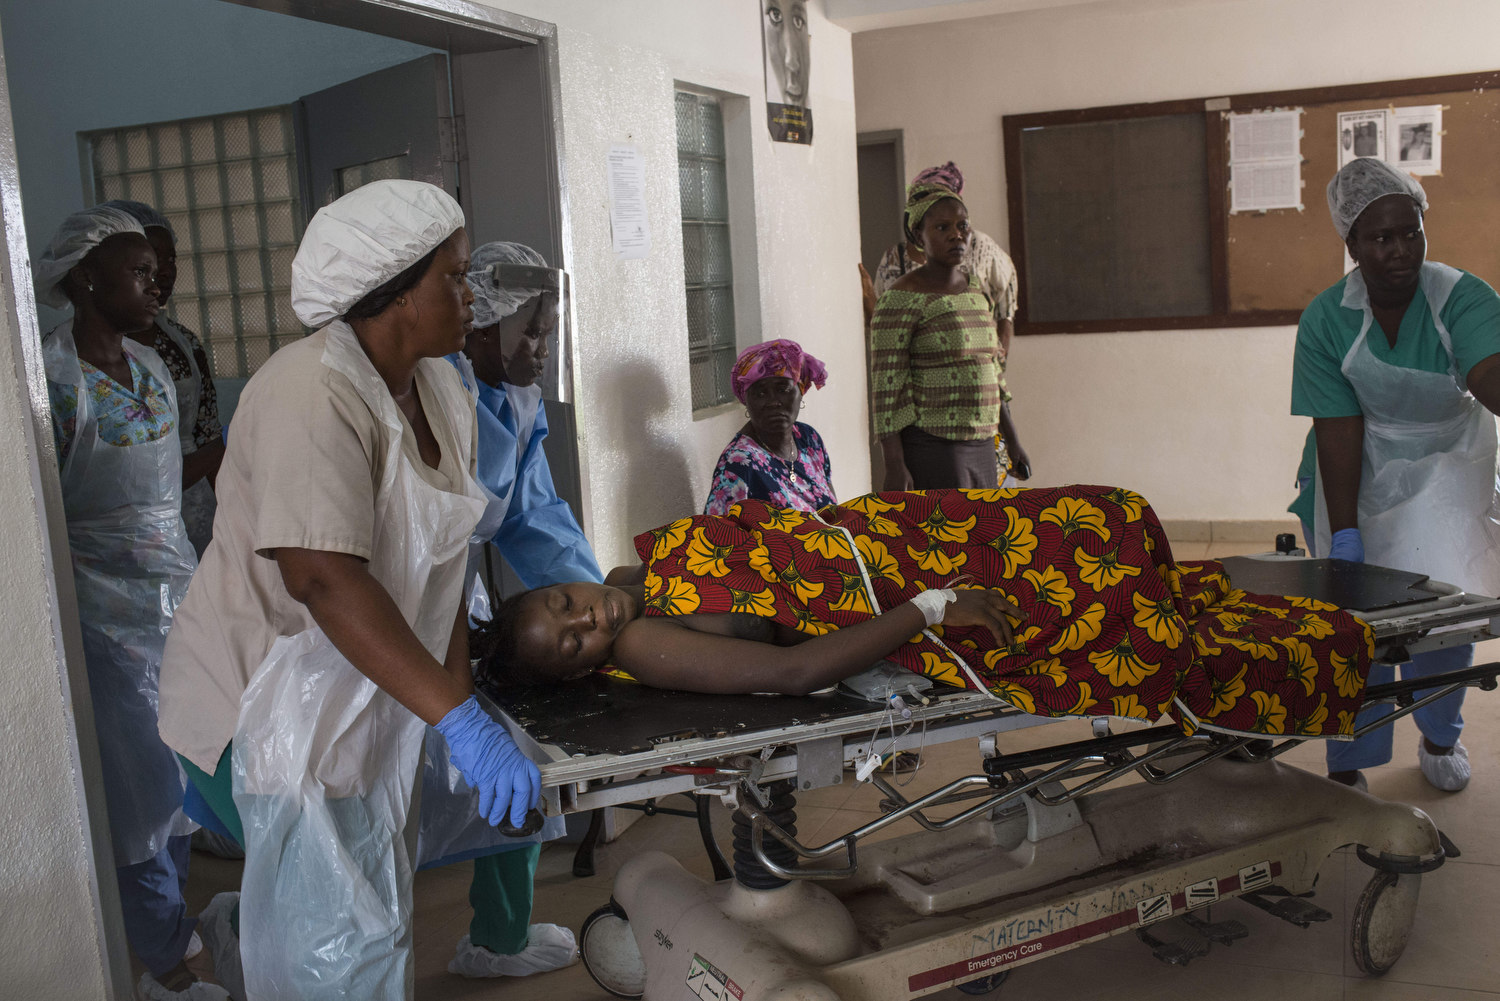  Christiana Dasama,17  is taken to surgery after giving birth due to excessive bleeding at Kenema Government Hospital in Kenema, Sierra Leone on November 11th, 2015. 